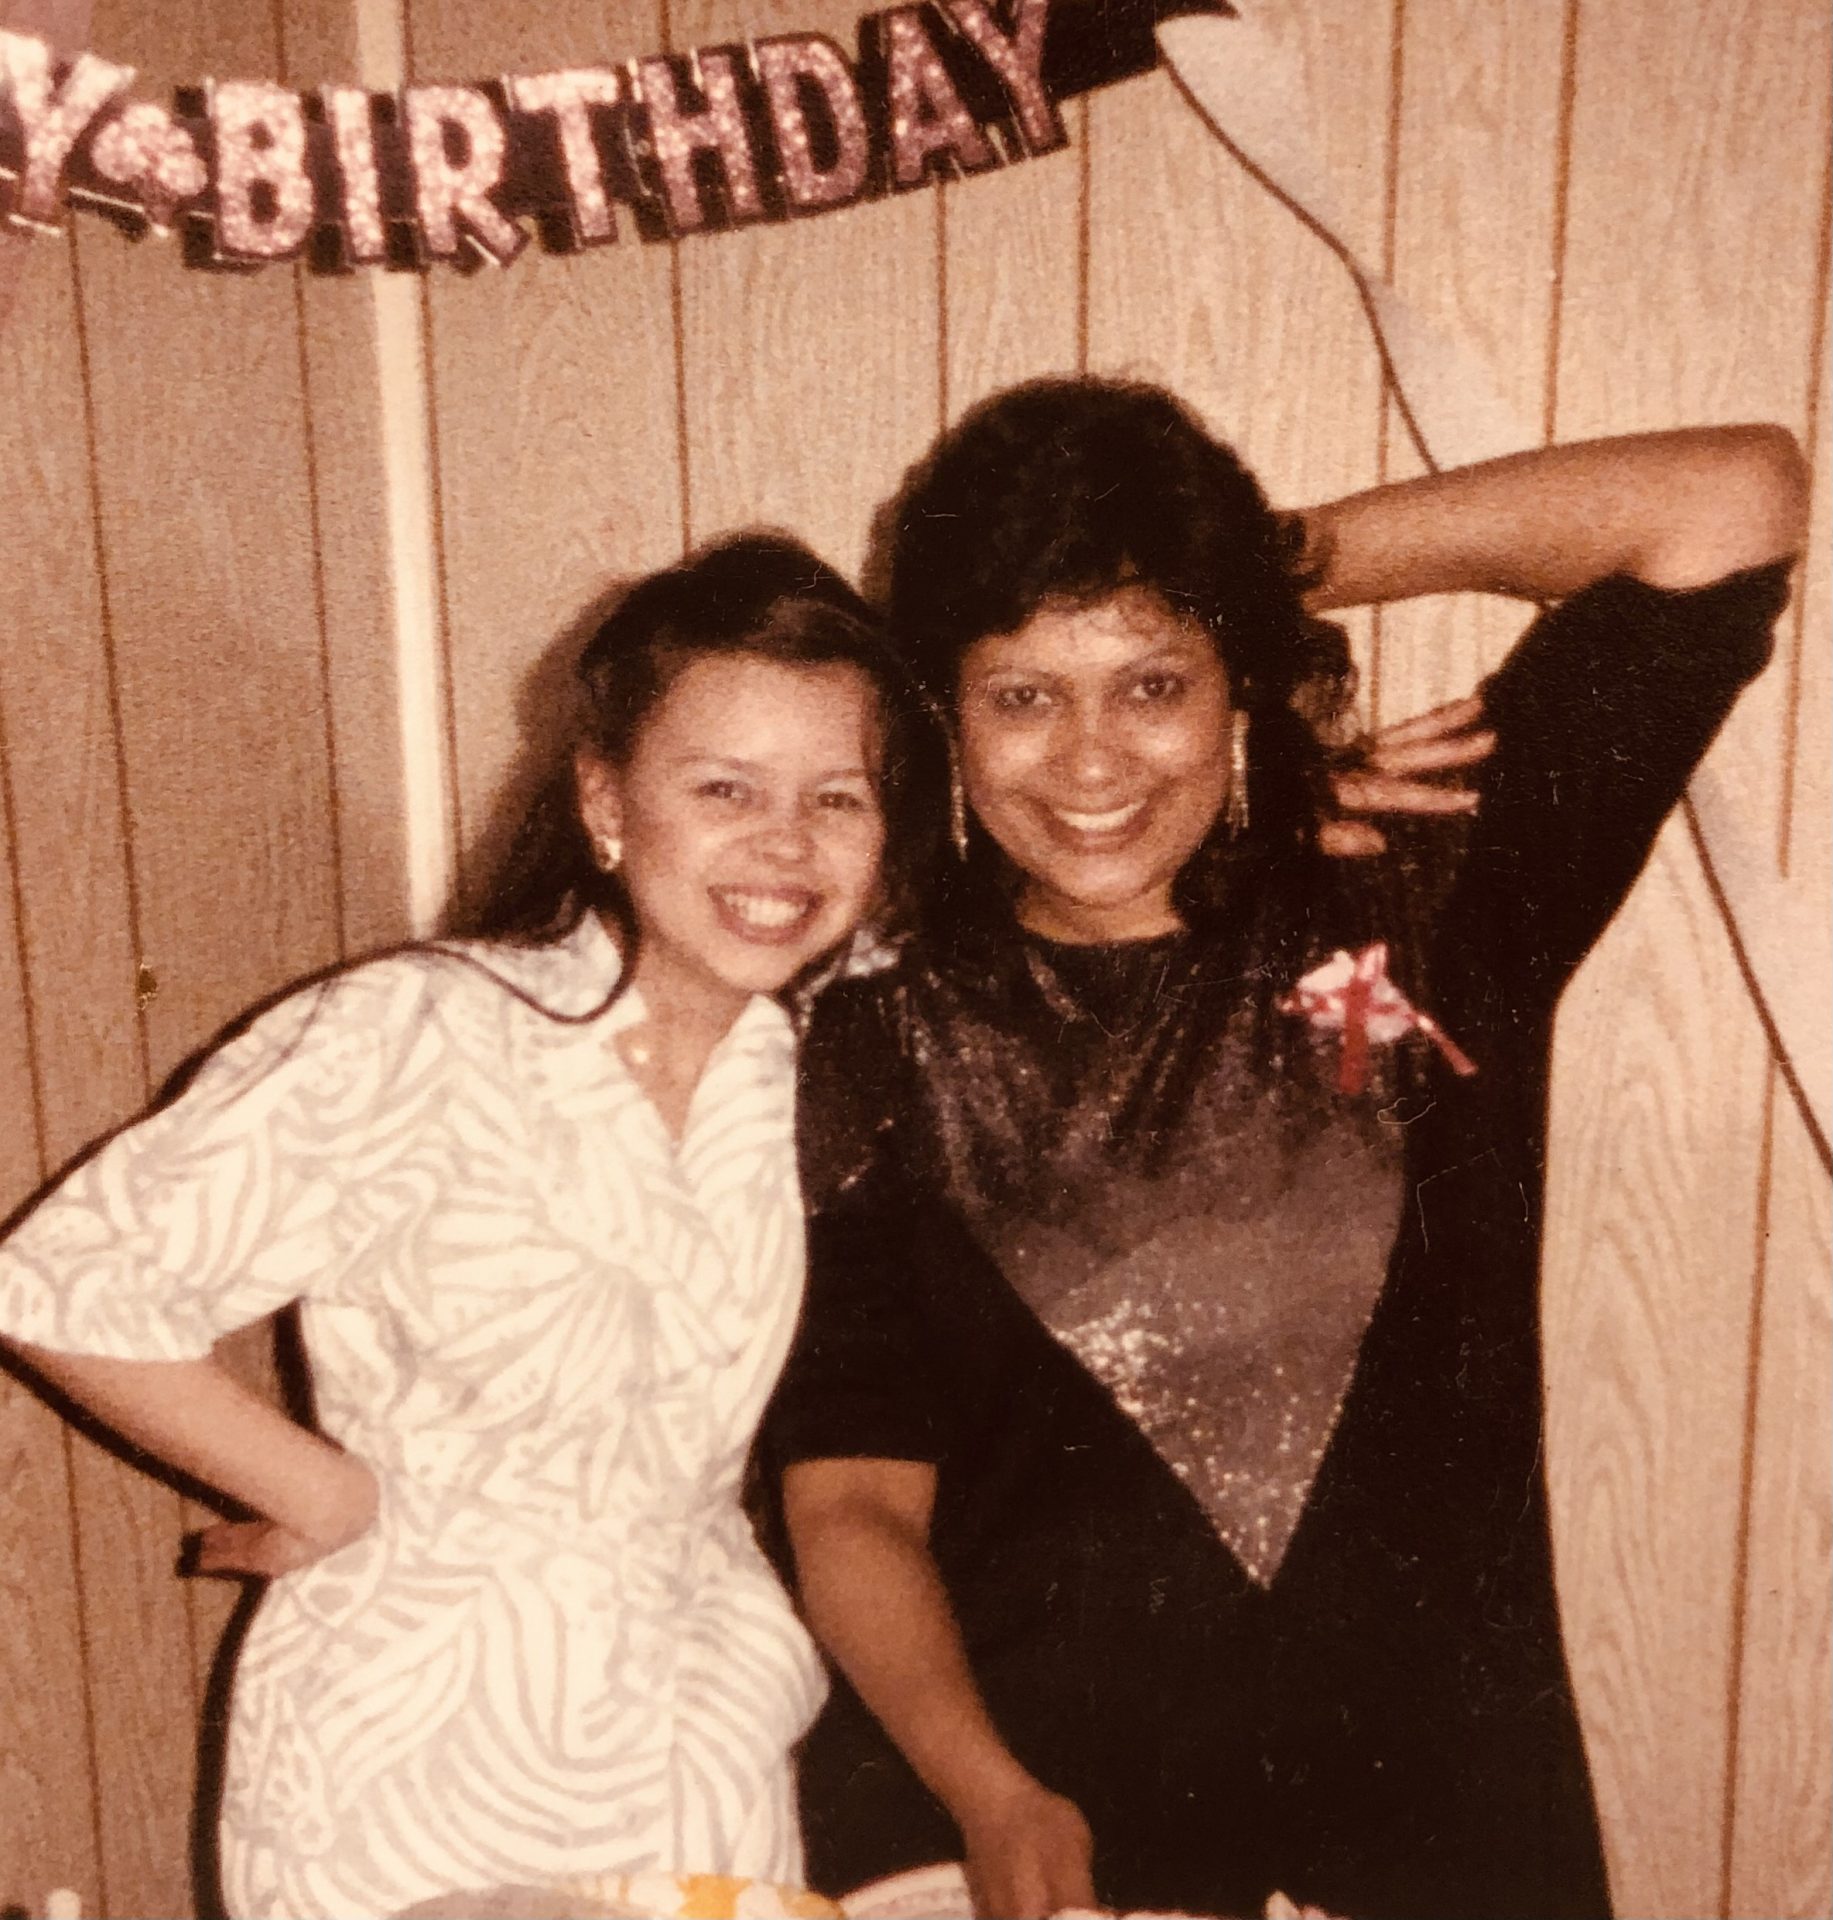 Birthday party back in 1987